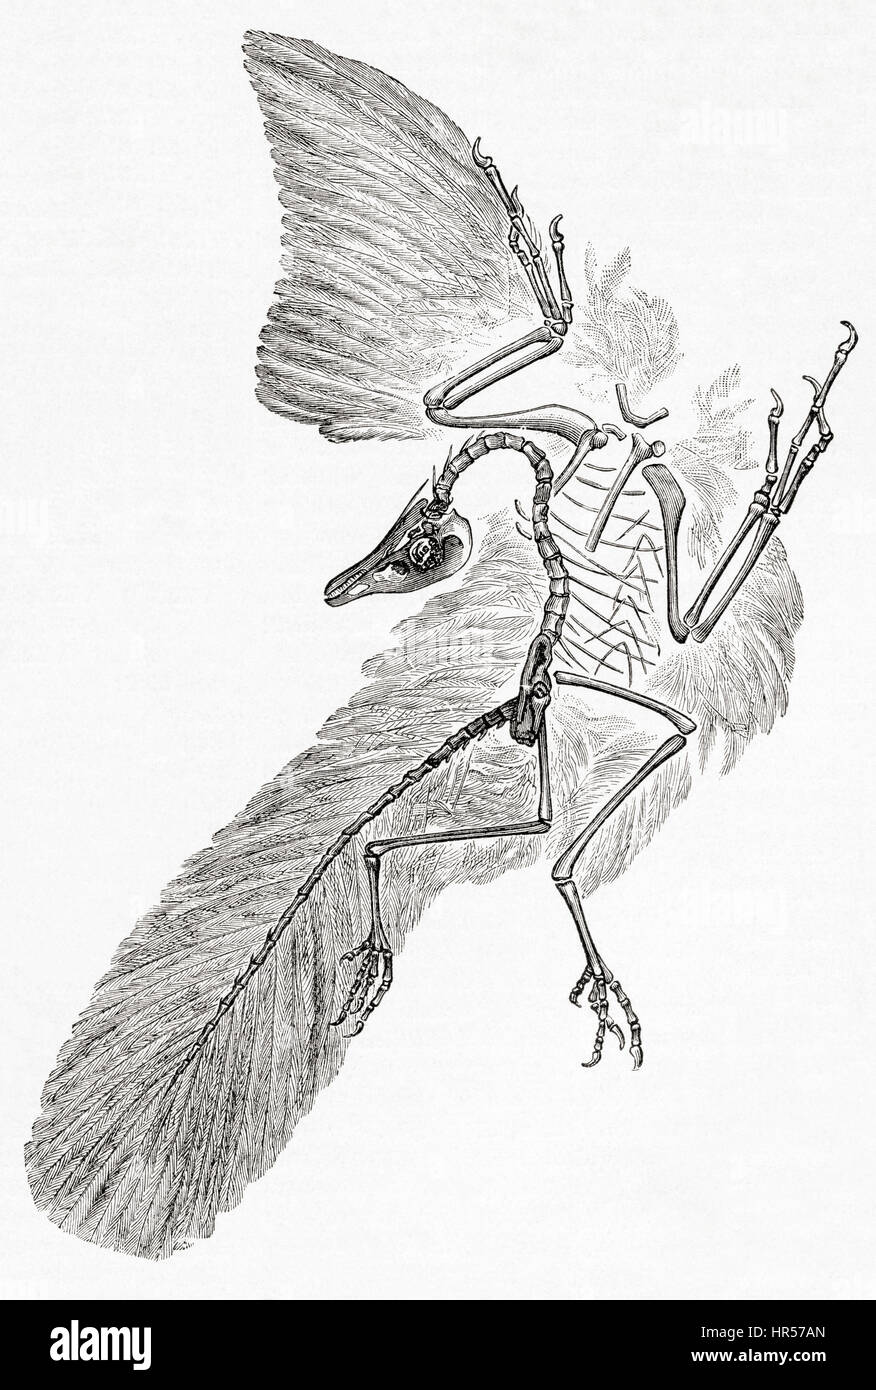 An Archaeopteryx,  genus of bird-like dinosaurs that is transitional between non-avian feathered dinosaurs and modern birds.  From Meyers Lexicon, published 1927. Stock Photo